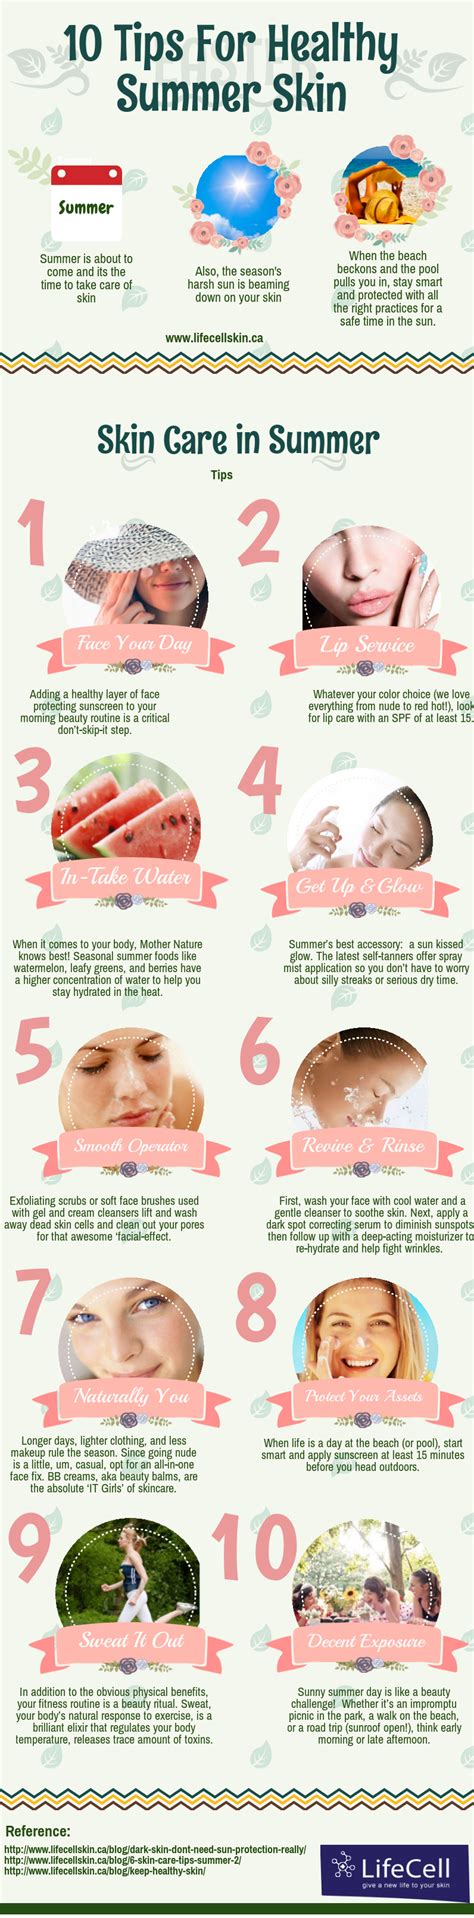 10 Tips For Healthy Summer Skin An Infographic Guide Lifecellskin